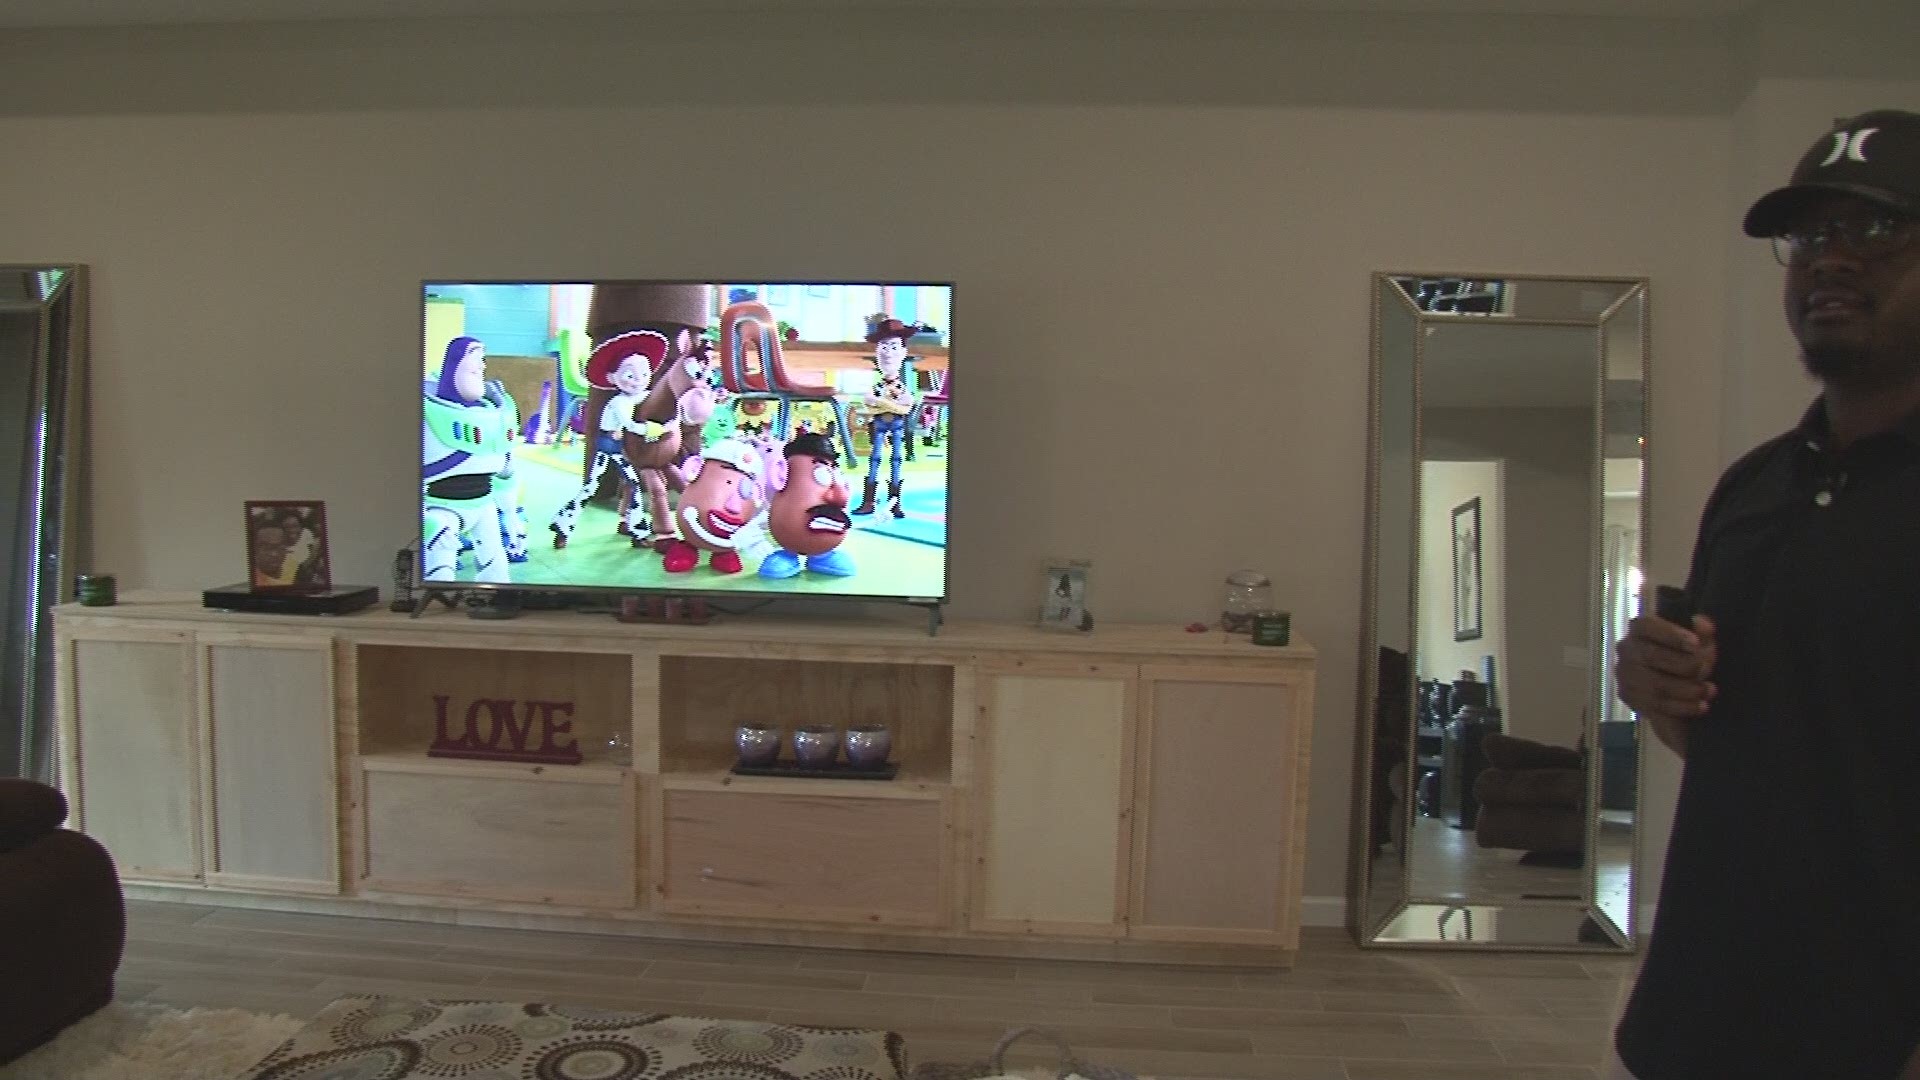 Local man gives First Coast News a tour of smart home